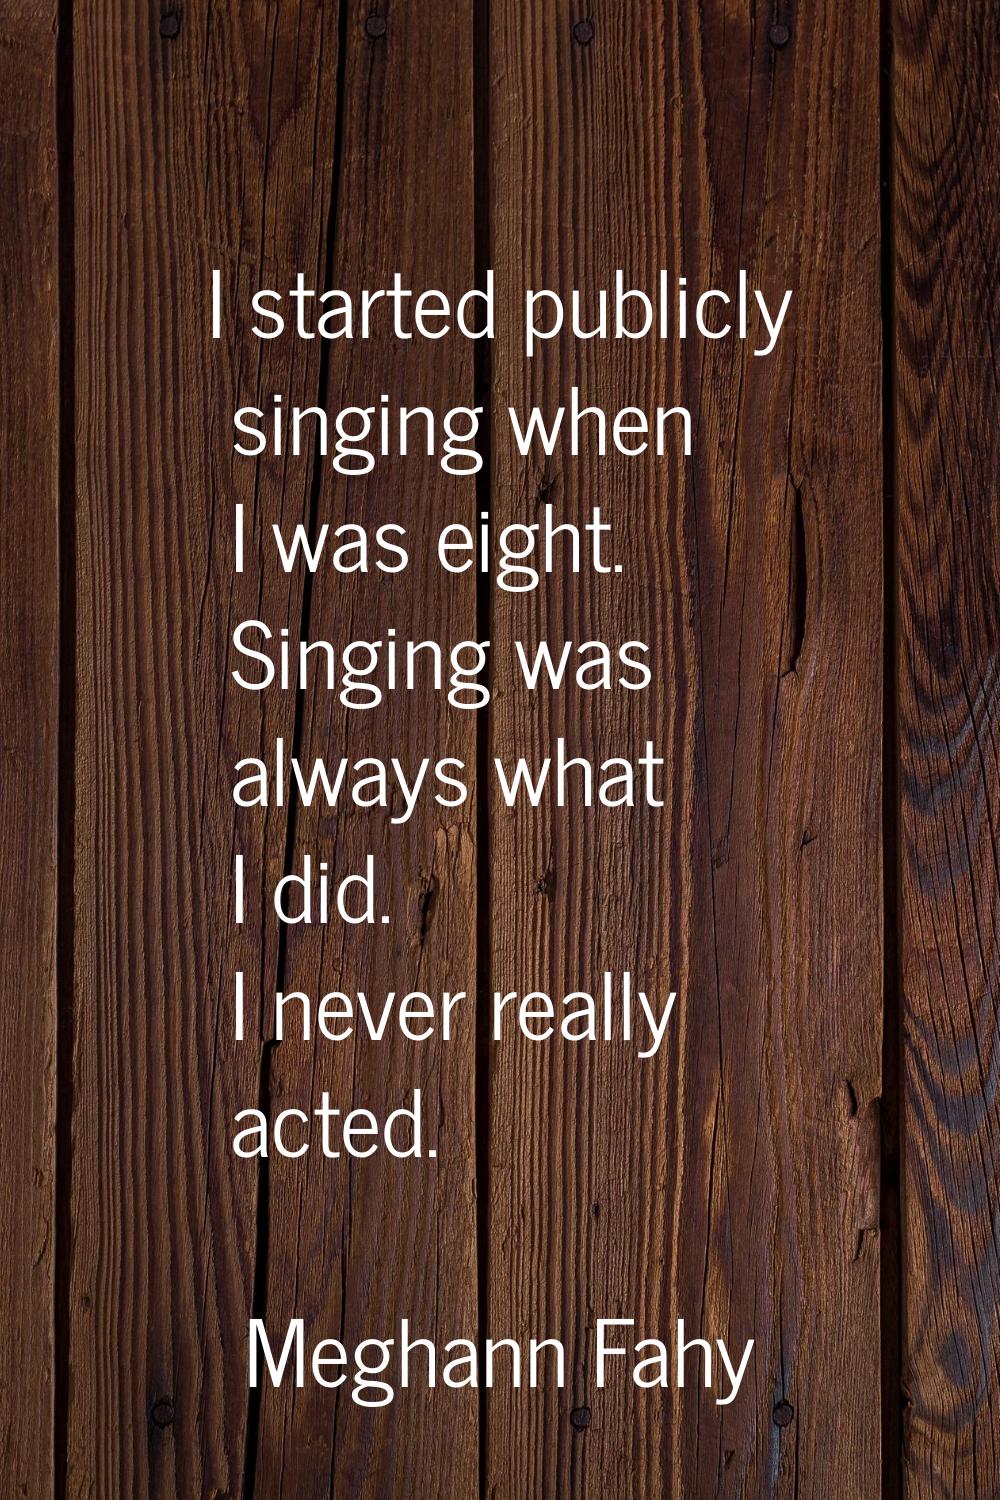 I started publicly singing when I was eight. Singing was always what I did. I never really acted.